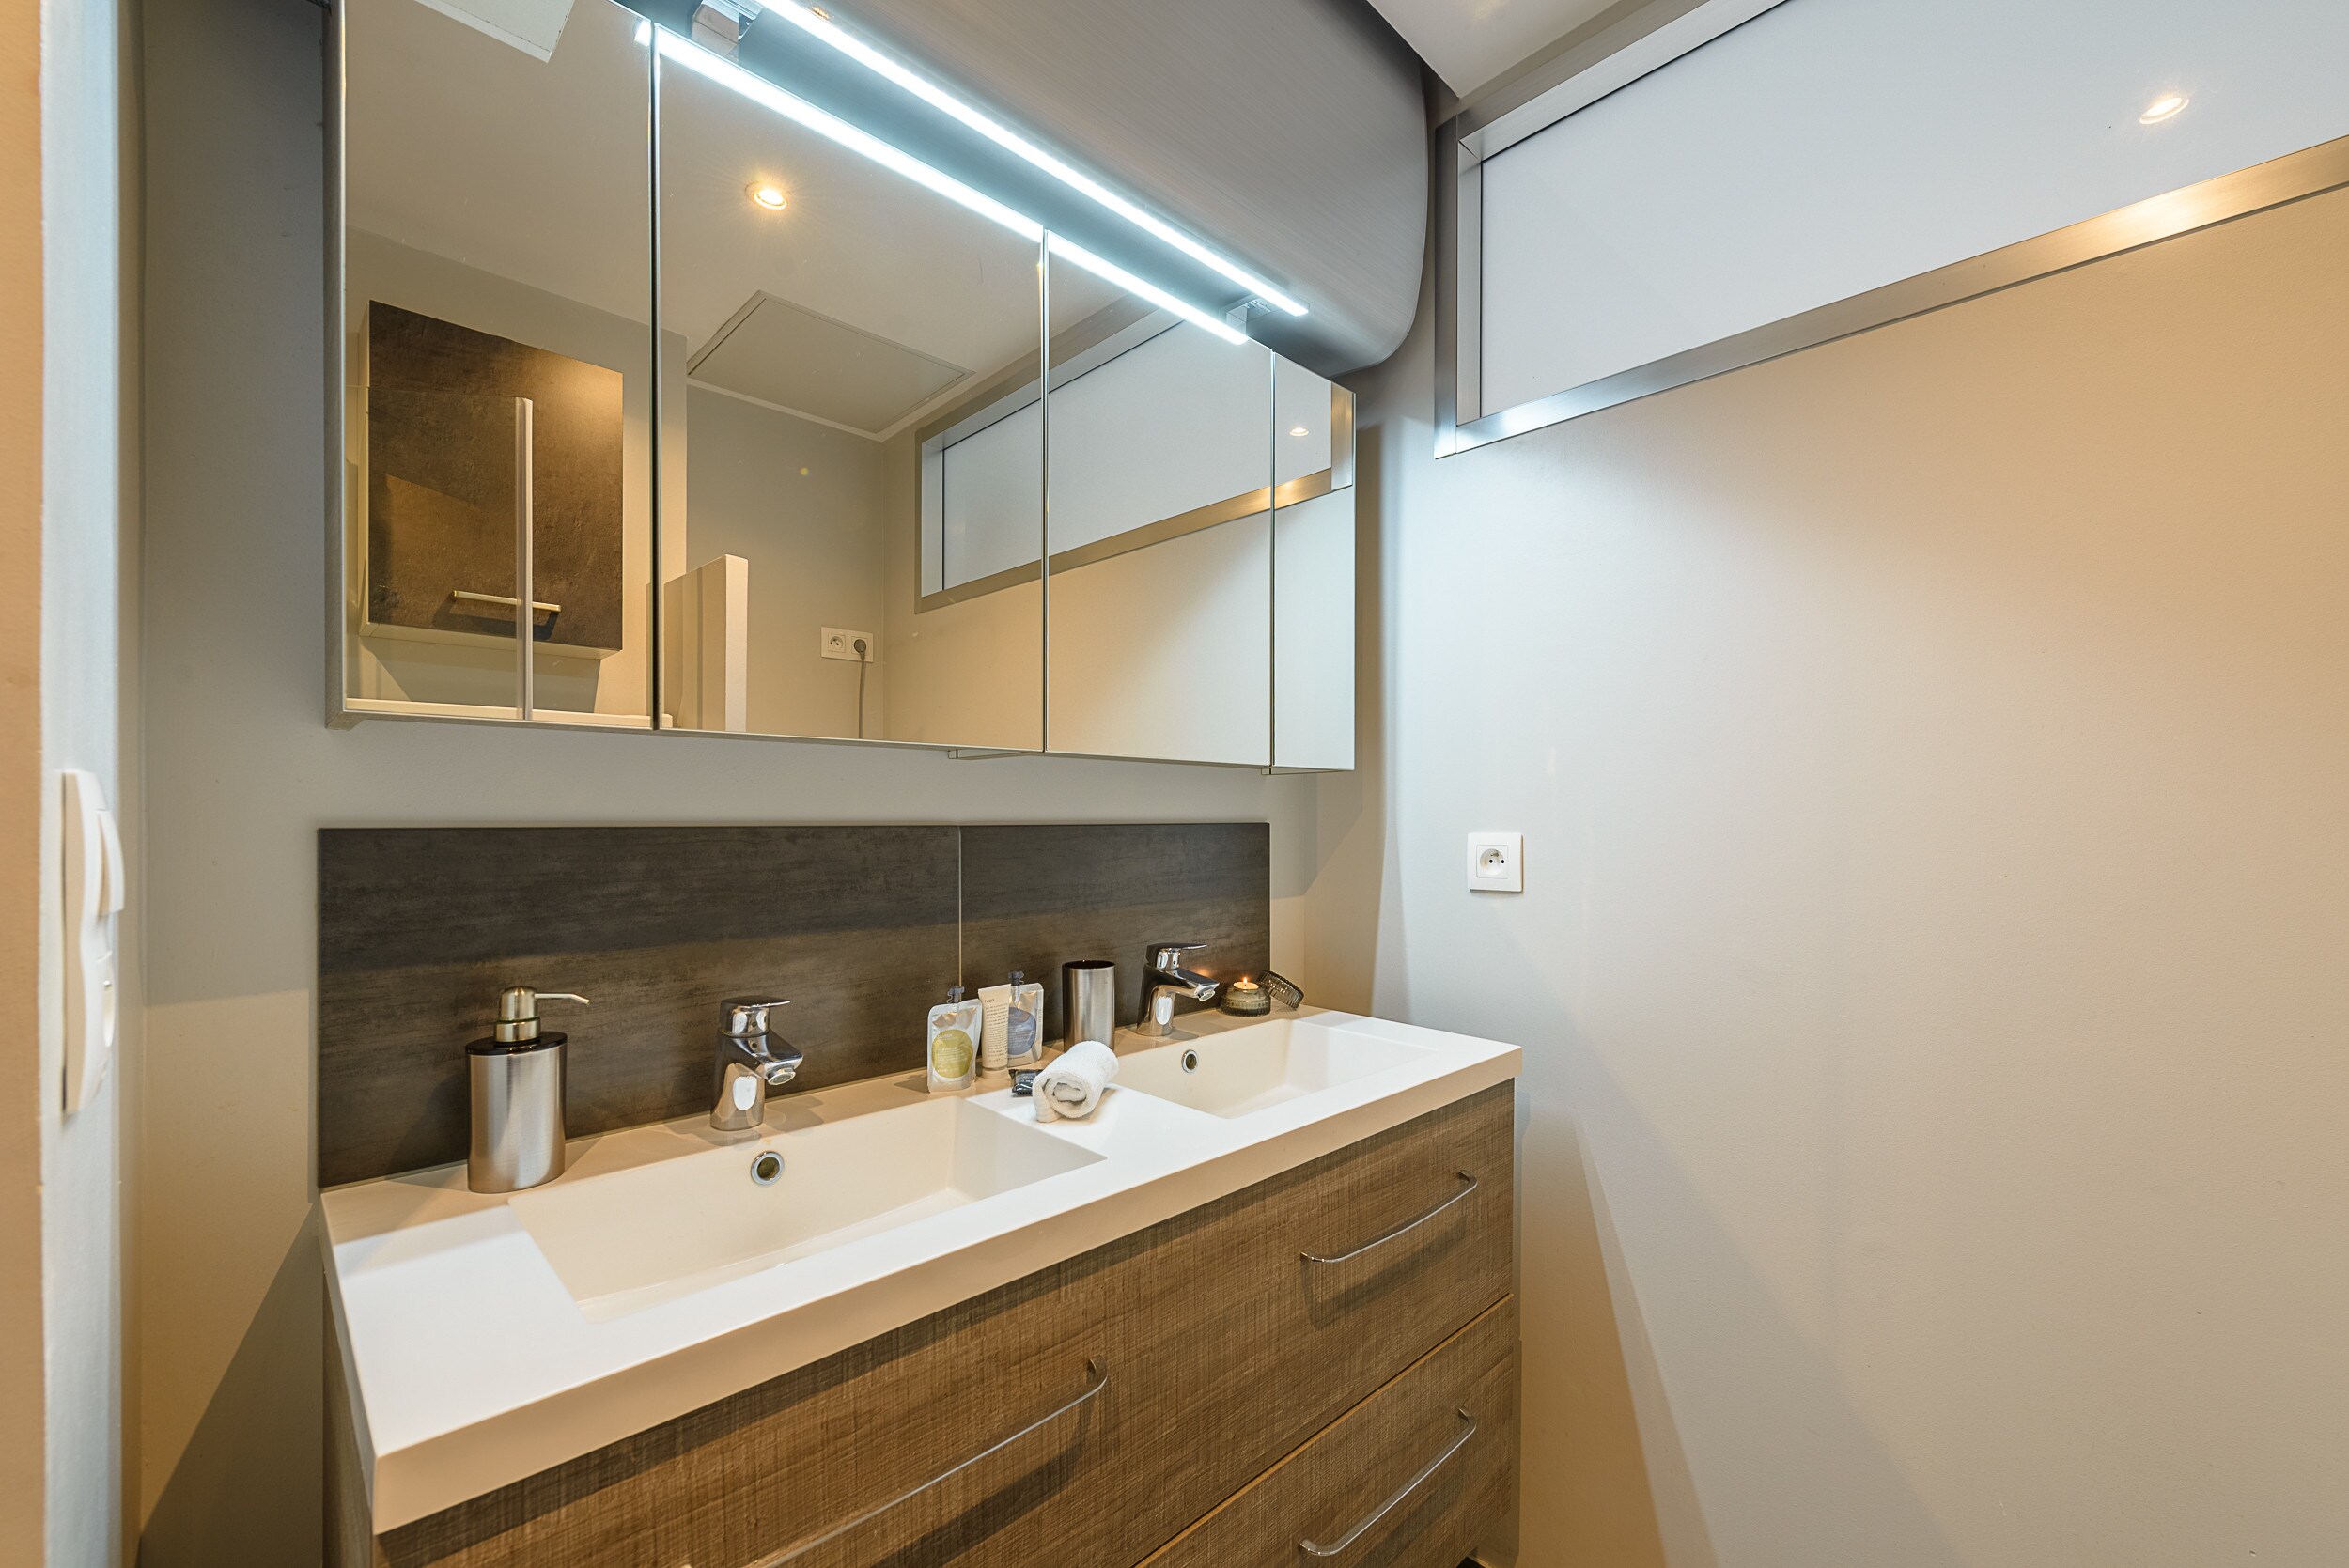 Discover our elegant shower room equipped with washing machine, shower and double basin. Enjoy the comfort and functionality of this modern shower room, ideal for all your needs during your stay. With its meticulous design and quality fittings, this shower room offers you a pleasant space.